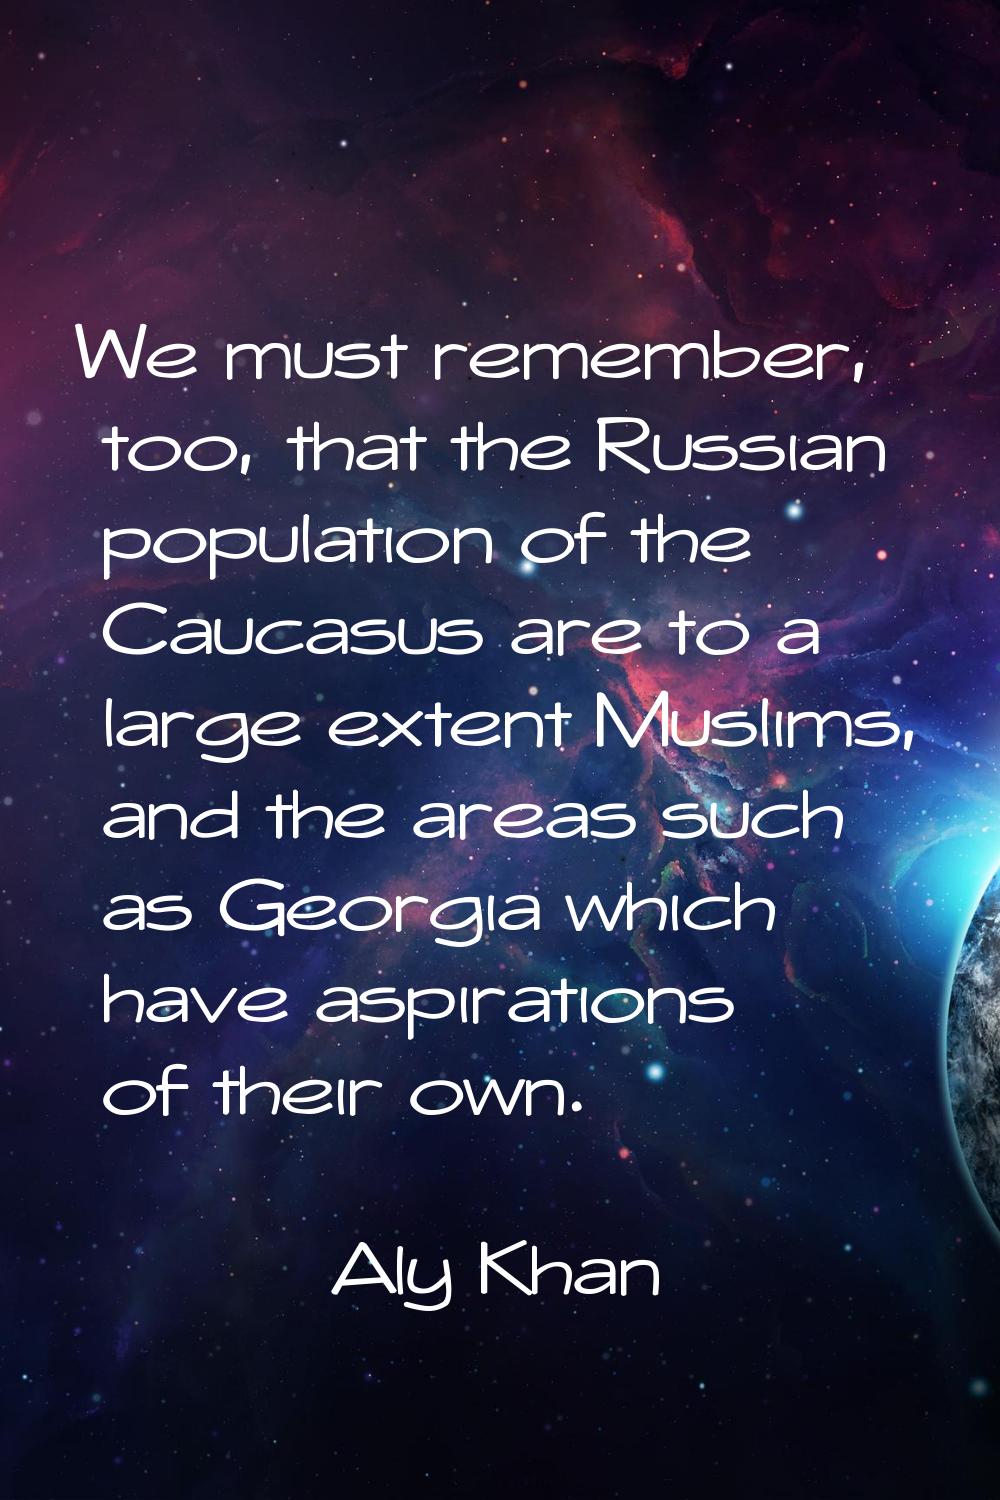 We must remember, too, that the Russian population of the Caucasus are to a large extent Muslims, a